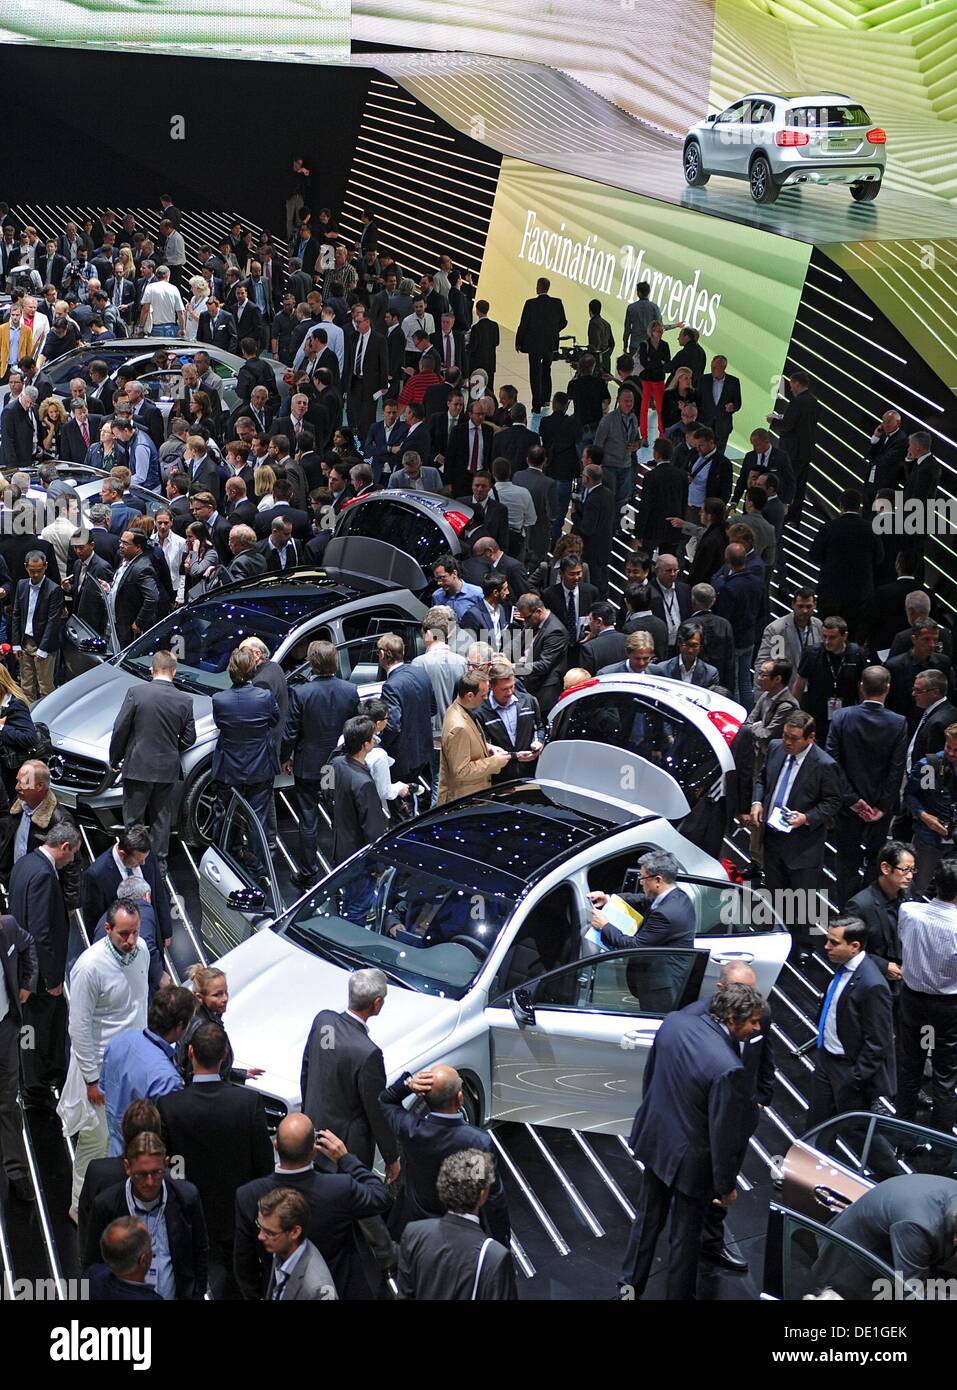 Frankfurt, Germany. 10th Sep, 2013. Tthe Mercedes Benz stand is crowded during the press day of the Frankfurt Motor Show IAA in Frankfurt, Germany, 10 September 2013. One of the most important car exhibitions in the world, Frankfurt Motor Show will be opened officially 12 September by German Chancellor Angela Merkel, running until 22 September 2013. Photo: UWE ZUCCHI/dpa/Alamy Live News/dpa/Alamy Live News Stock Photo